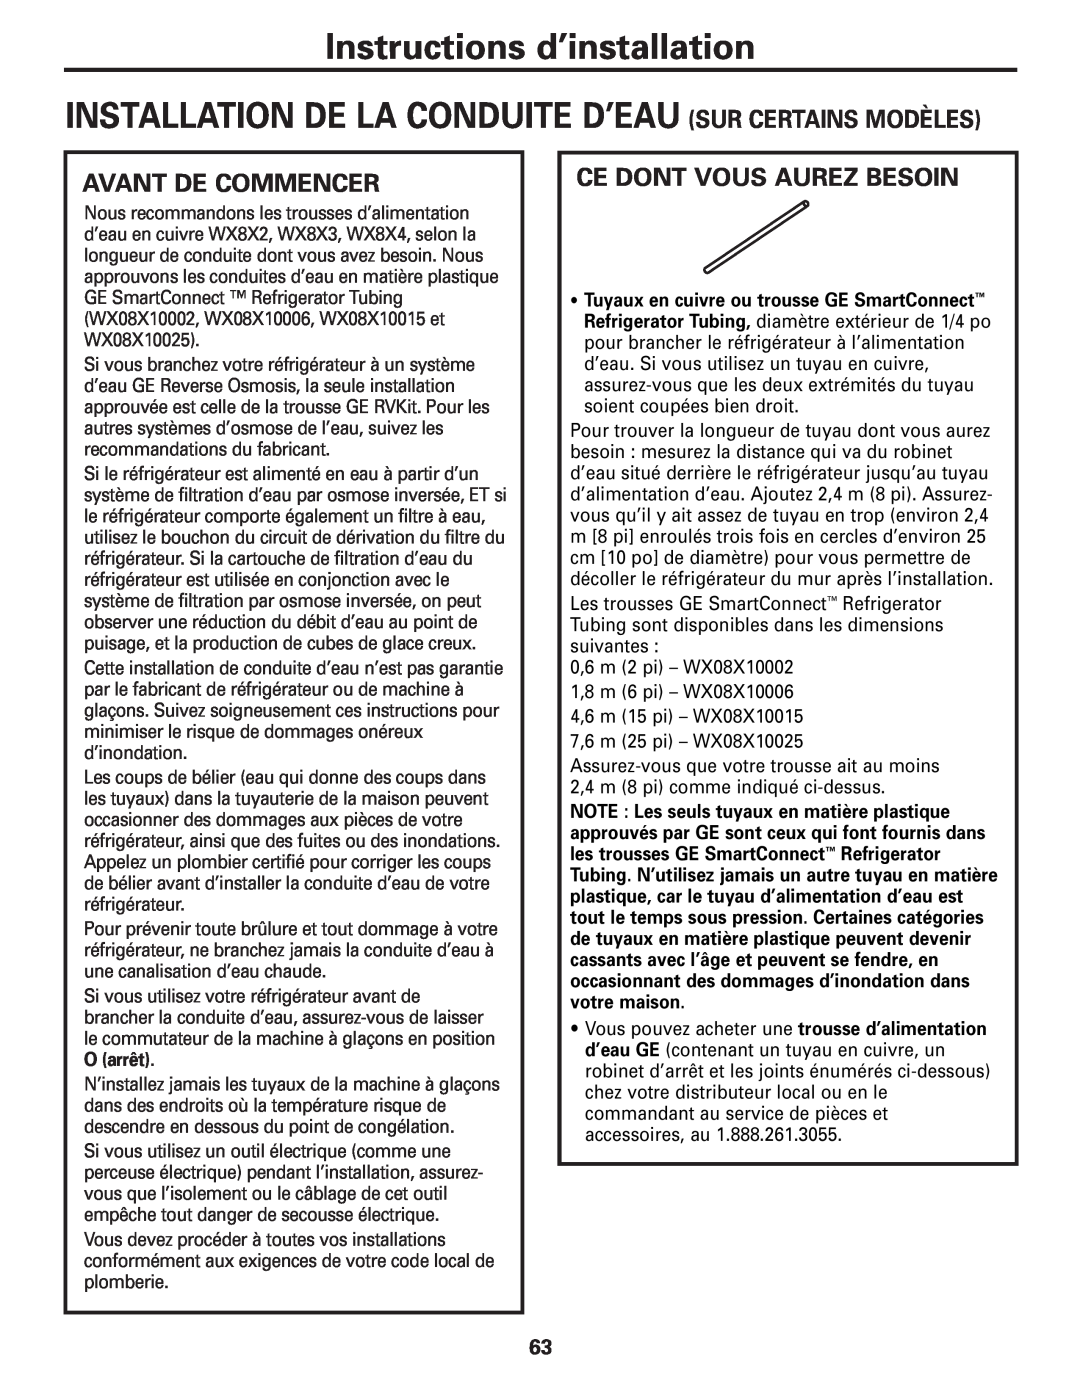 GE 25 and 27 installation instructions Ce Dont Vous Aurez Besoin, Instructions d’installation, Avant De Commencer 